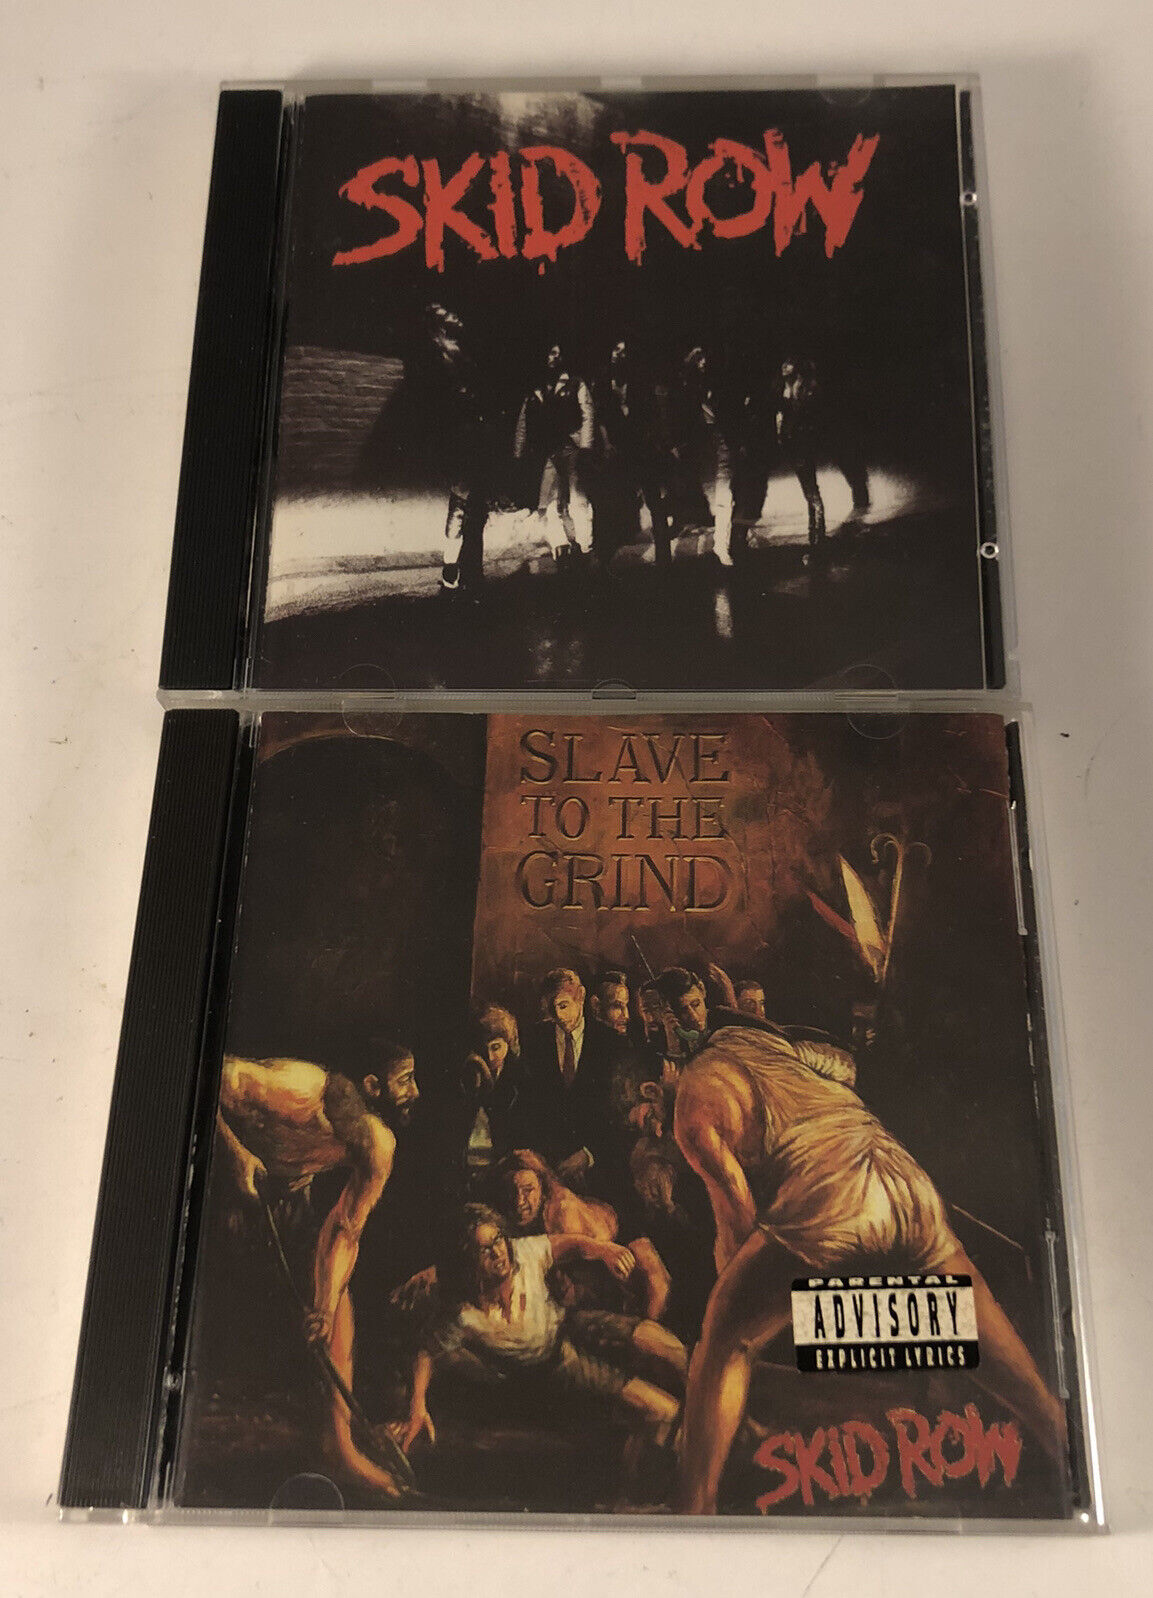 Skid Row 2 CD Lot - Slave To The Grind Rare Atlantic 7 82242-2 & S/T 7 81936-2